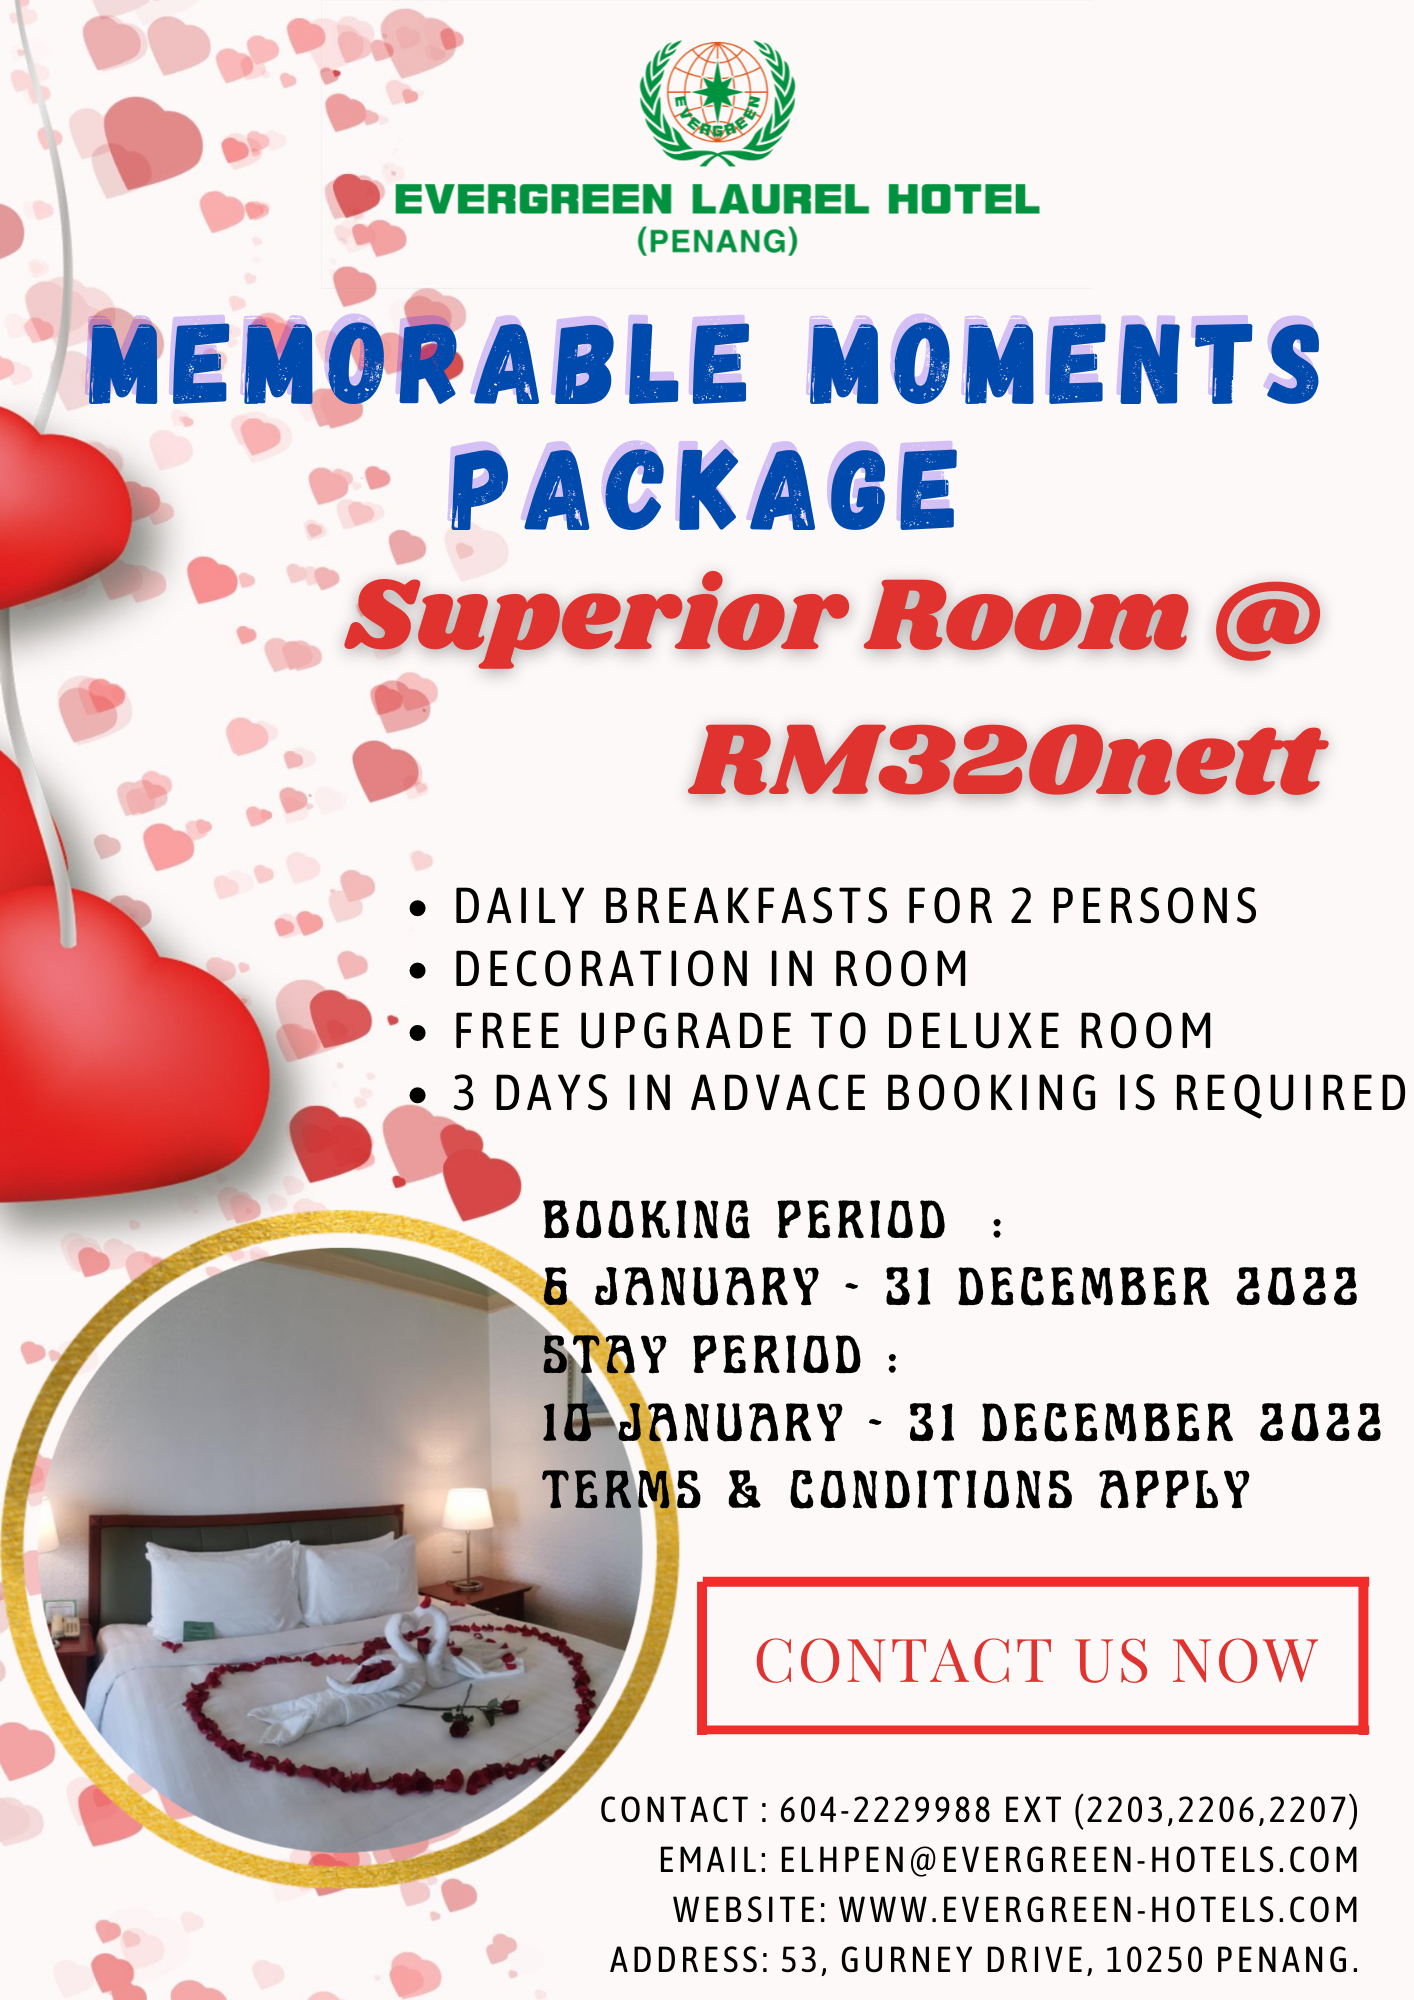 Memorable Moments Package by Evergreen Laurel Hotel Penang